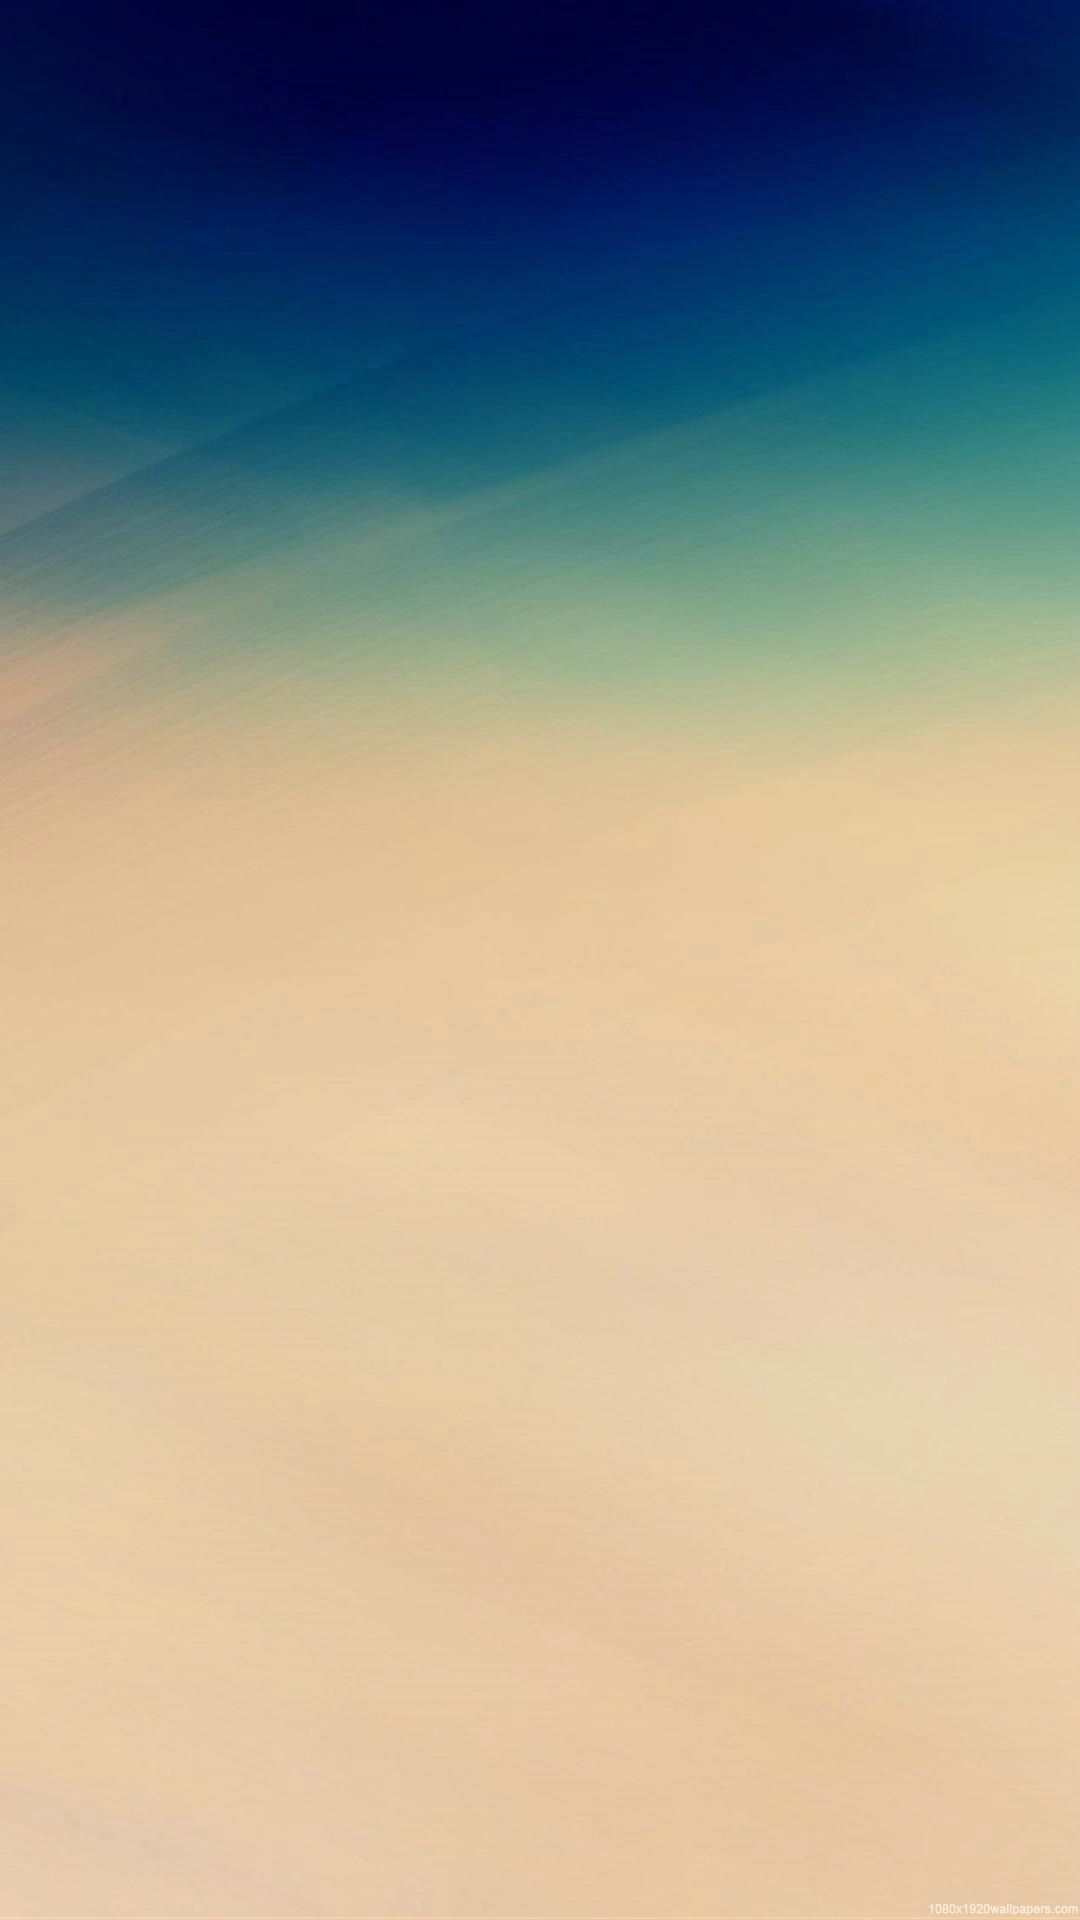 Simple Background for Phone. iPhone Wallpaper, Phone Wallpaper and Beautiful iPhone Wallpaper